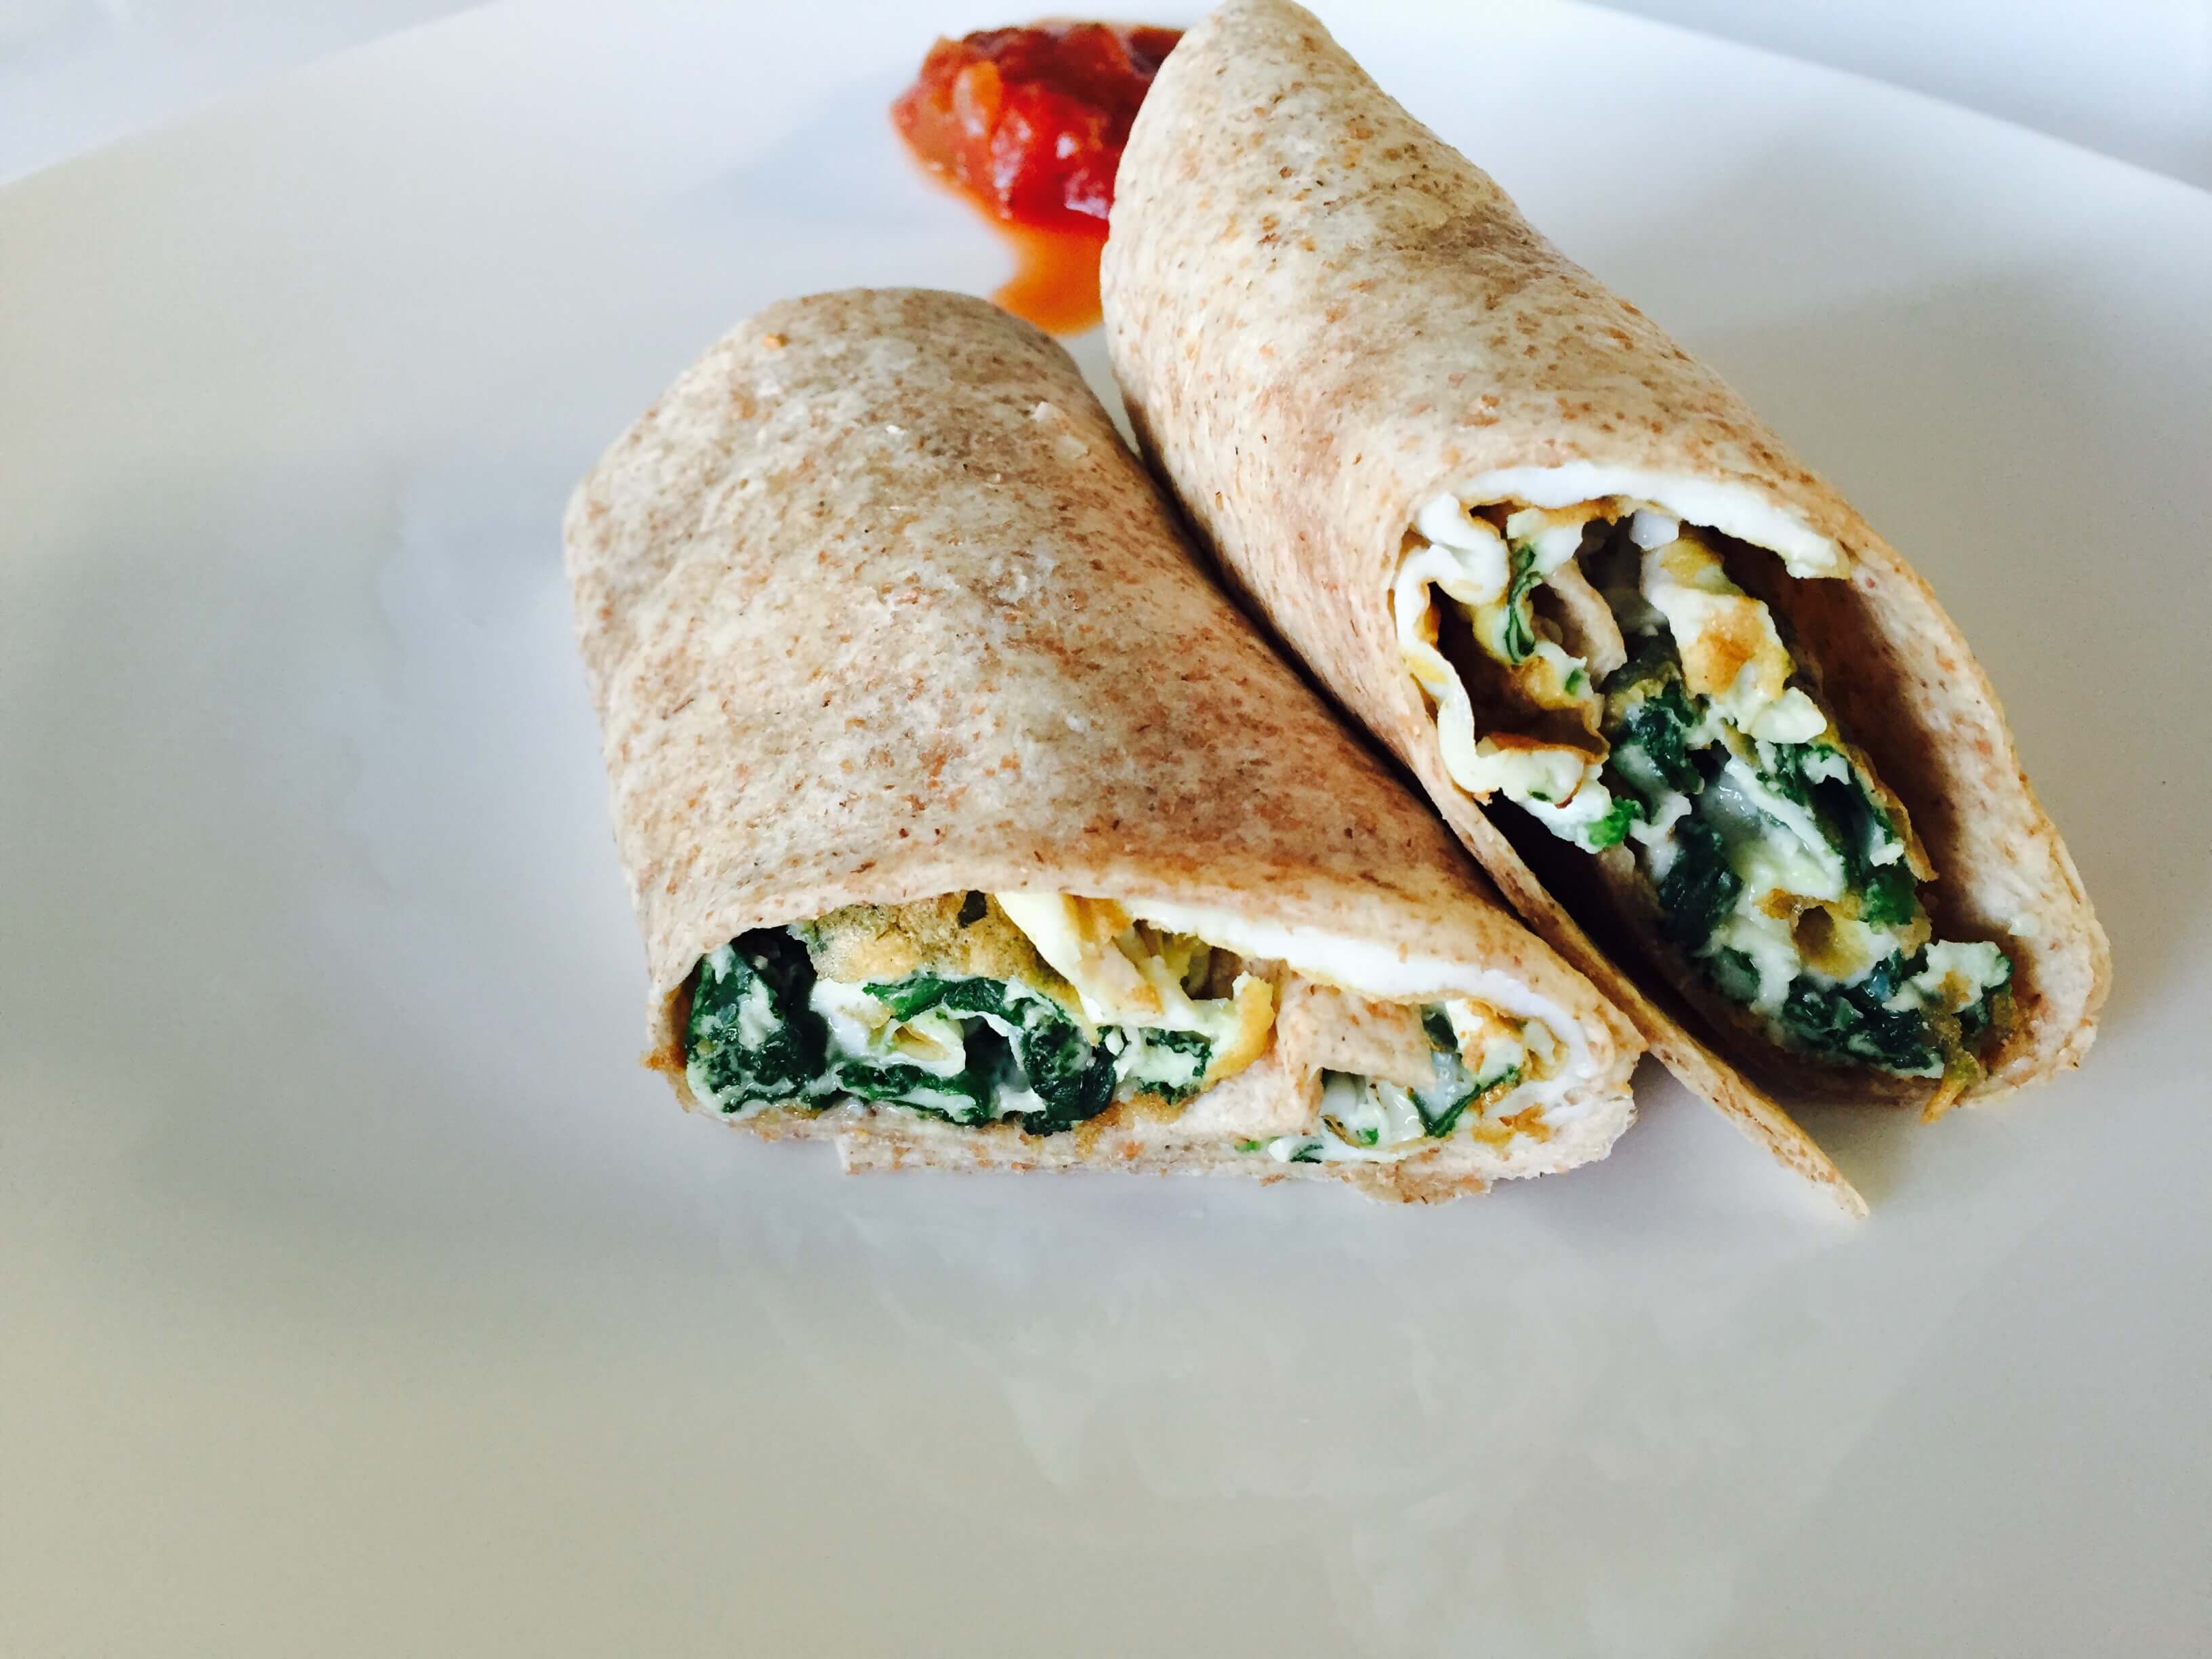 30 Days of Egg Whites: Spinach, Goats Cheese and Egg White Wrap